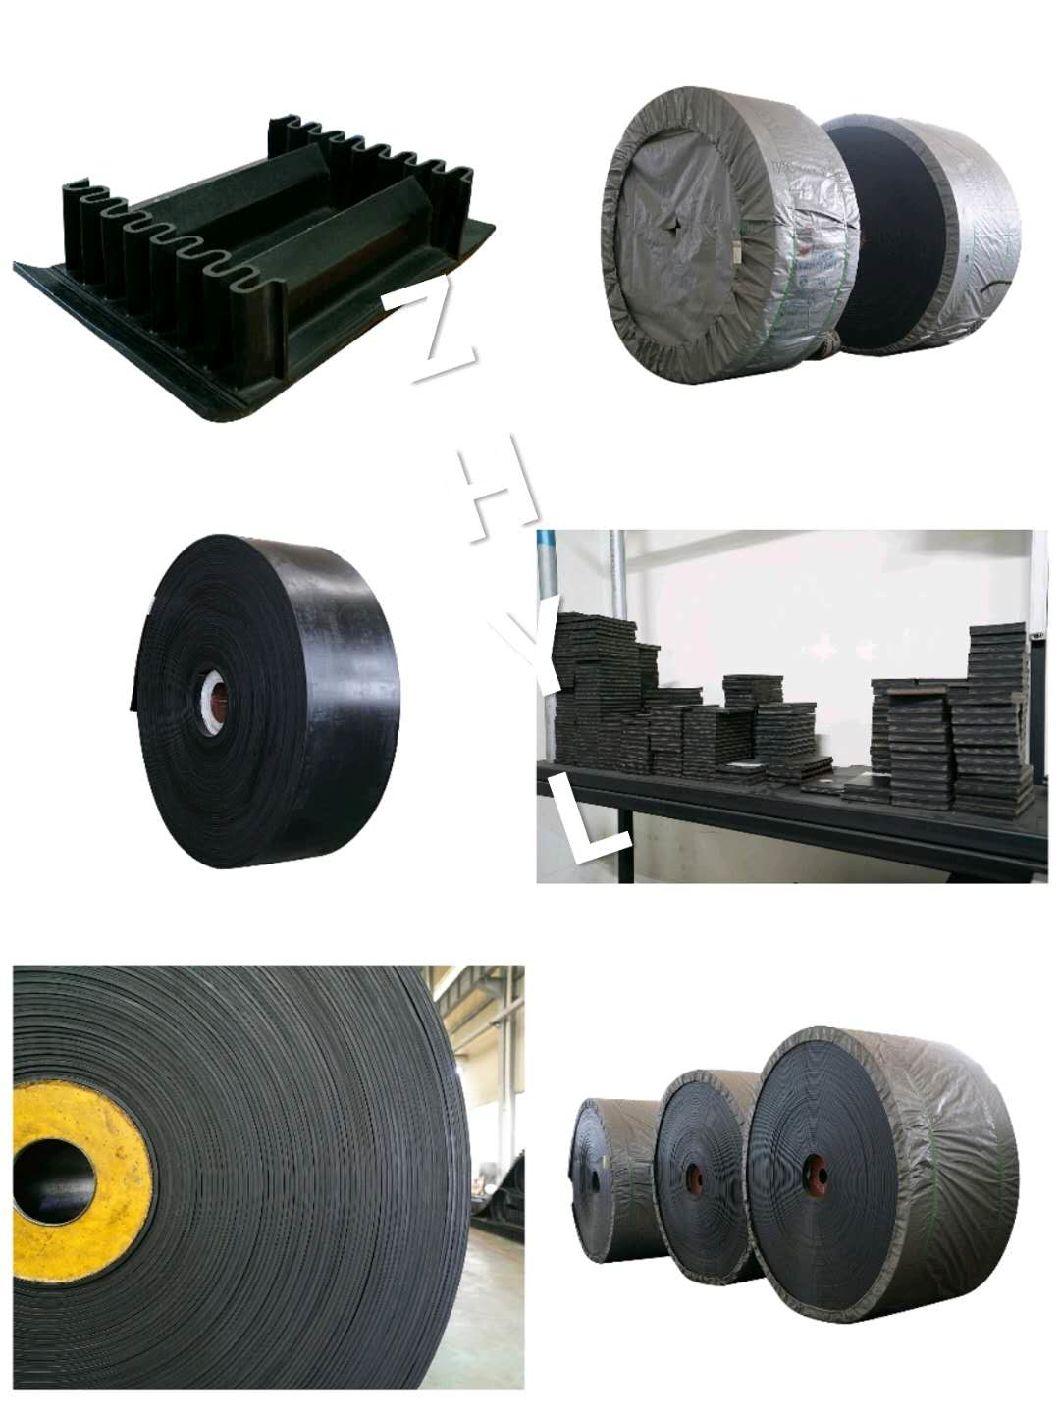 Hot Sale Low Price Rubber Nylon Conveyor Belting for Stone Crushing and Quarry Plants